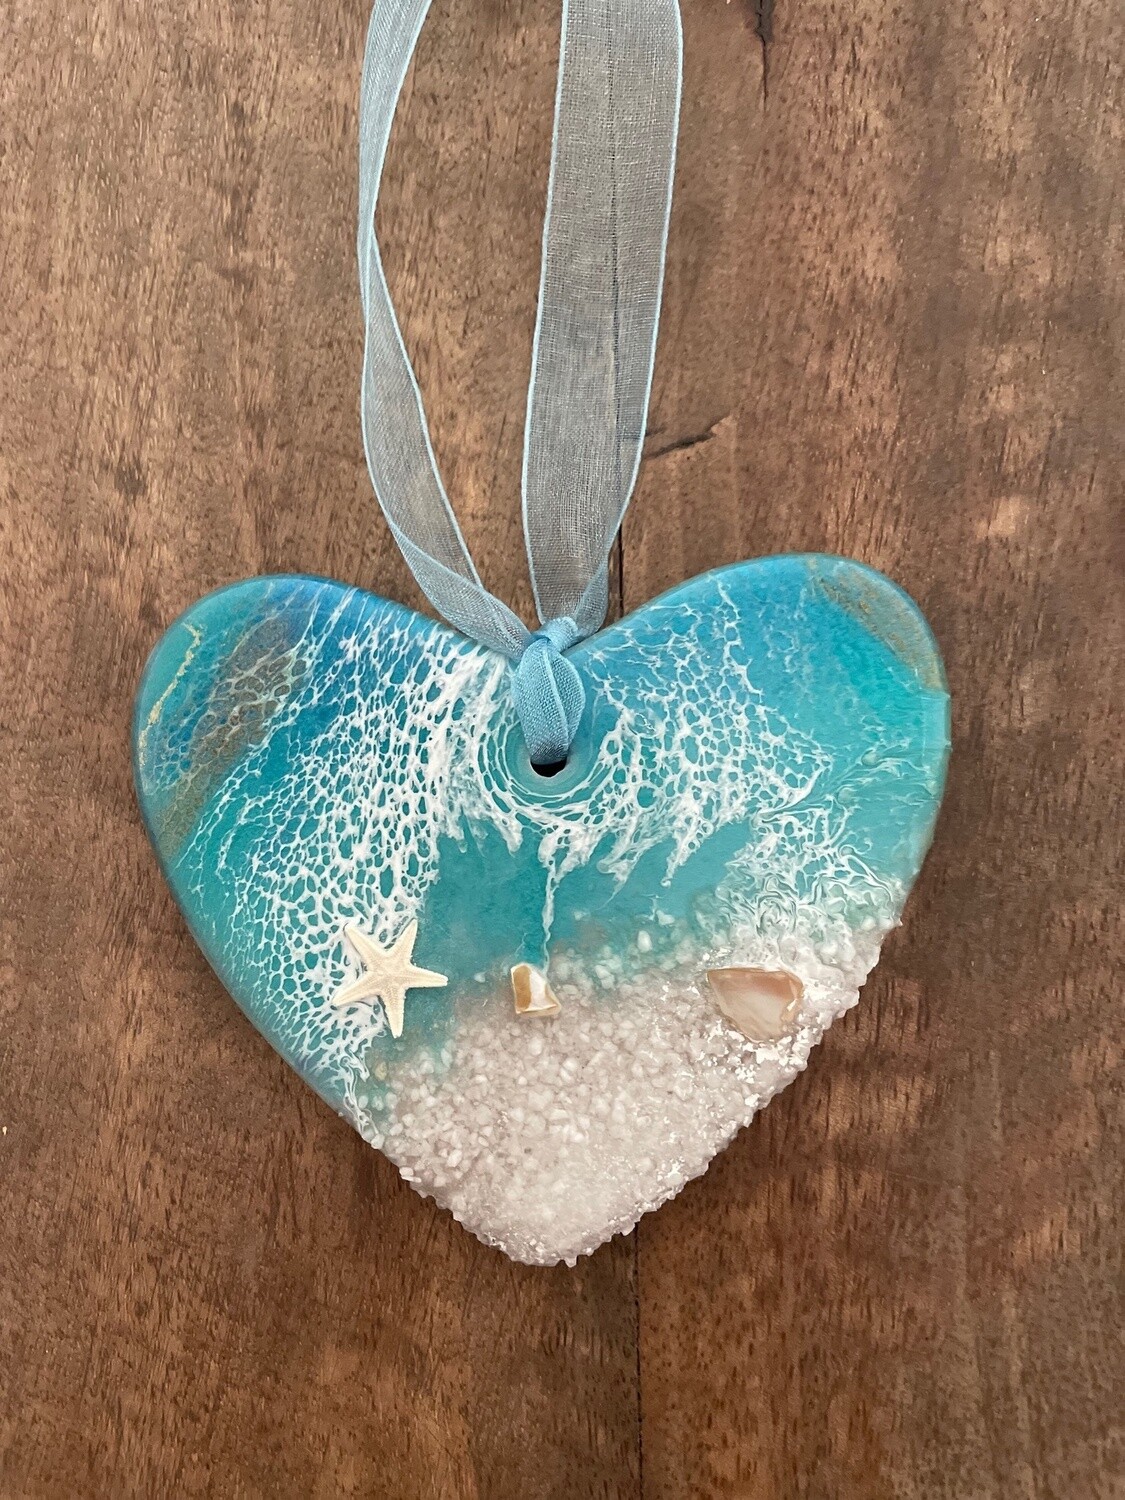 Resin Ornament Heart Light Teal with Shells